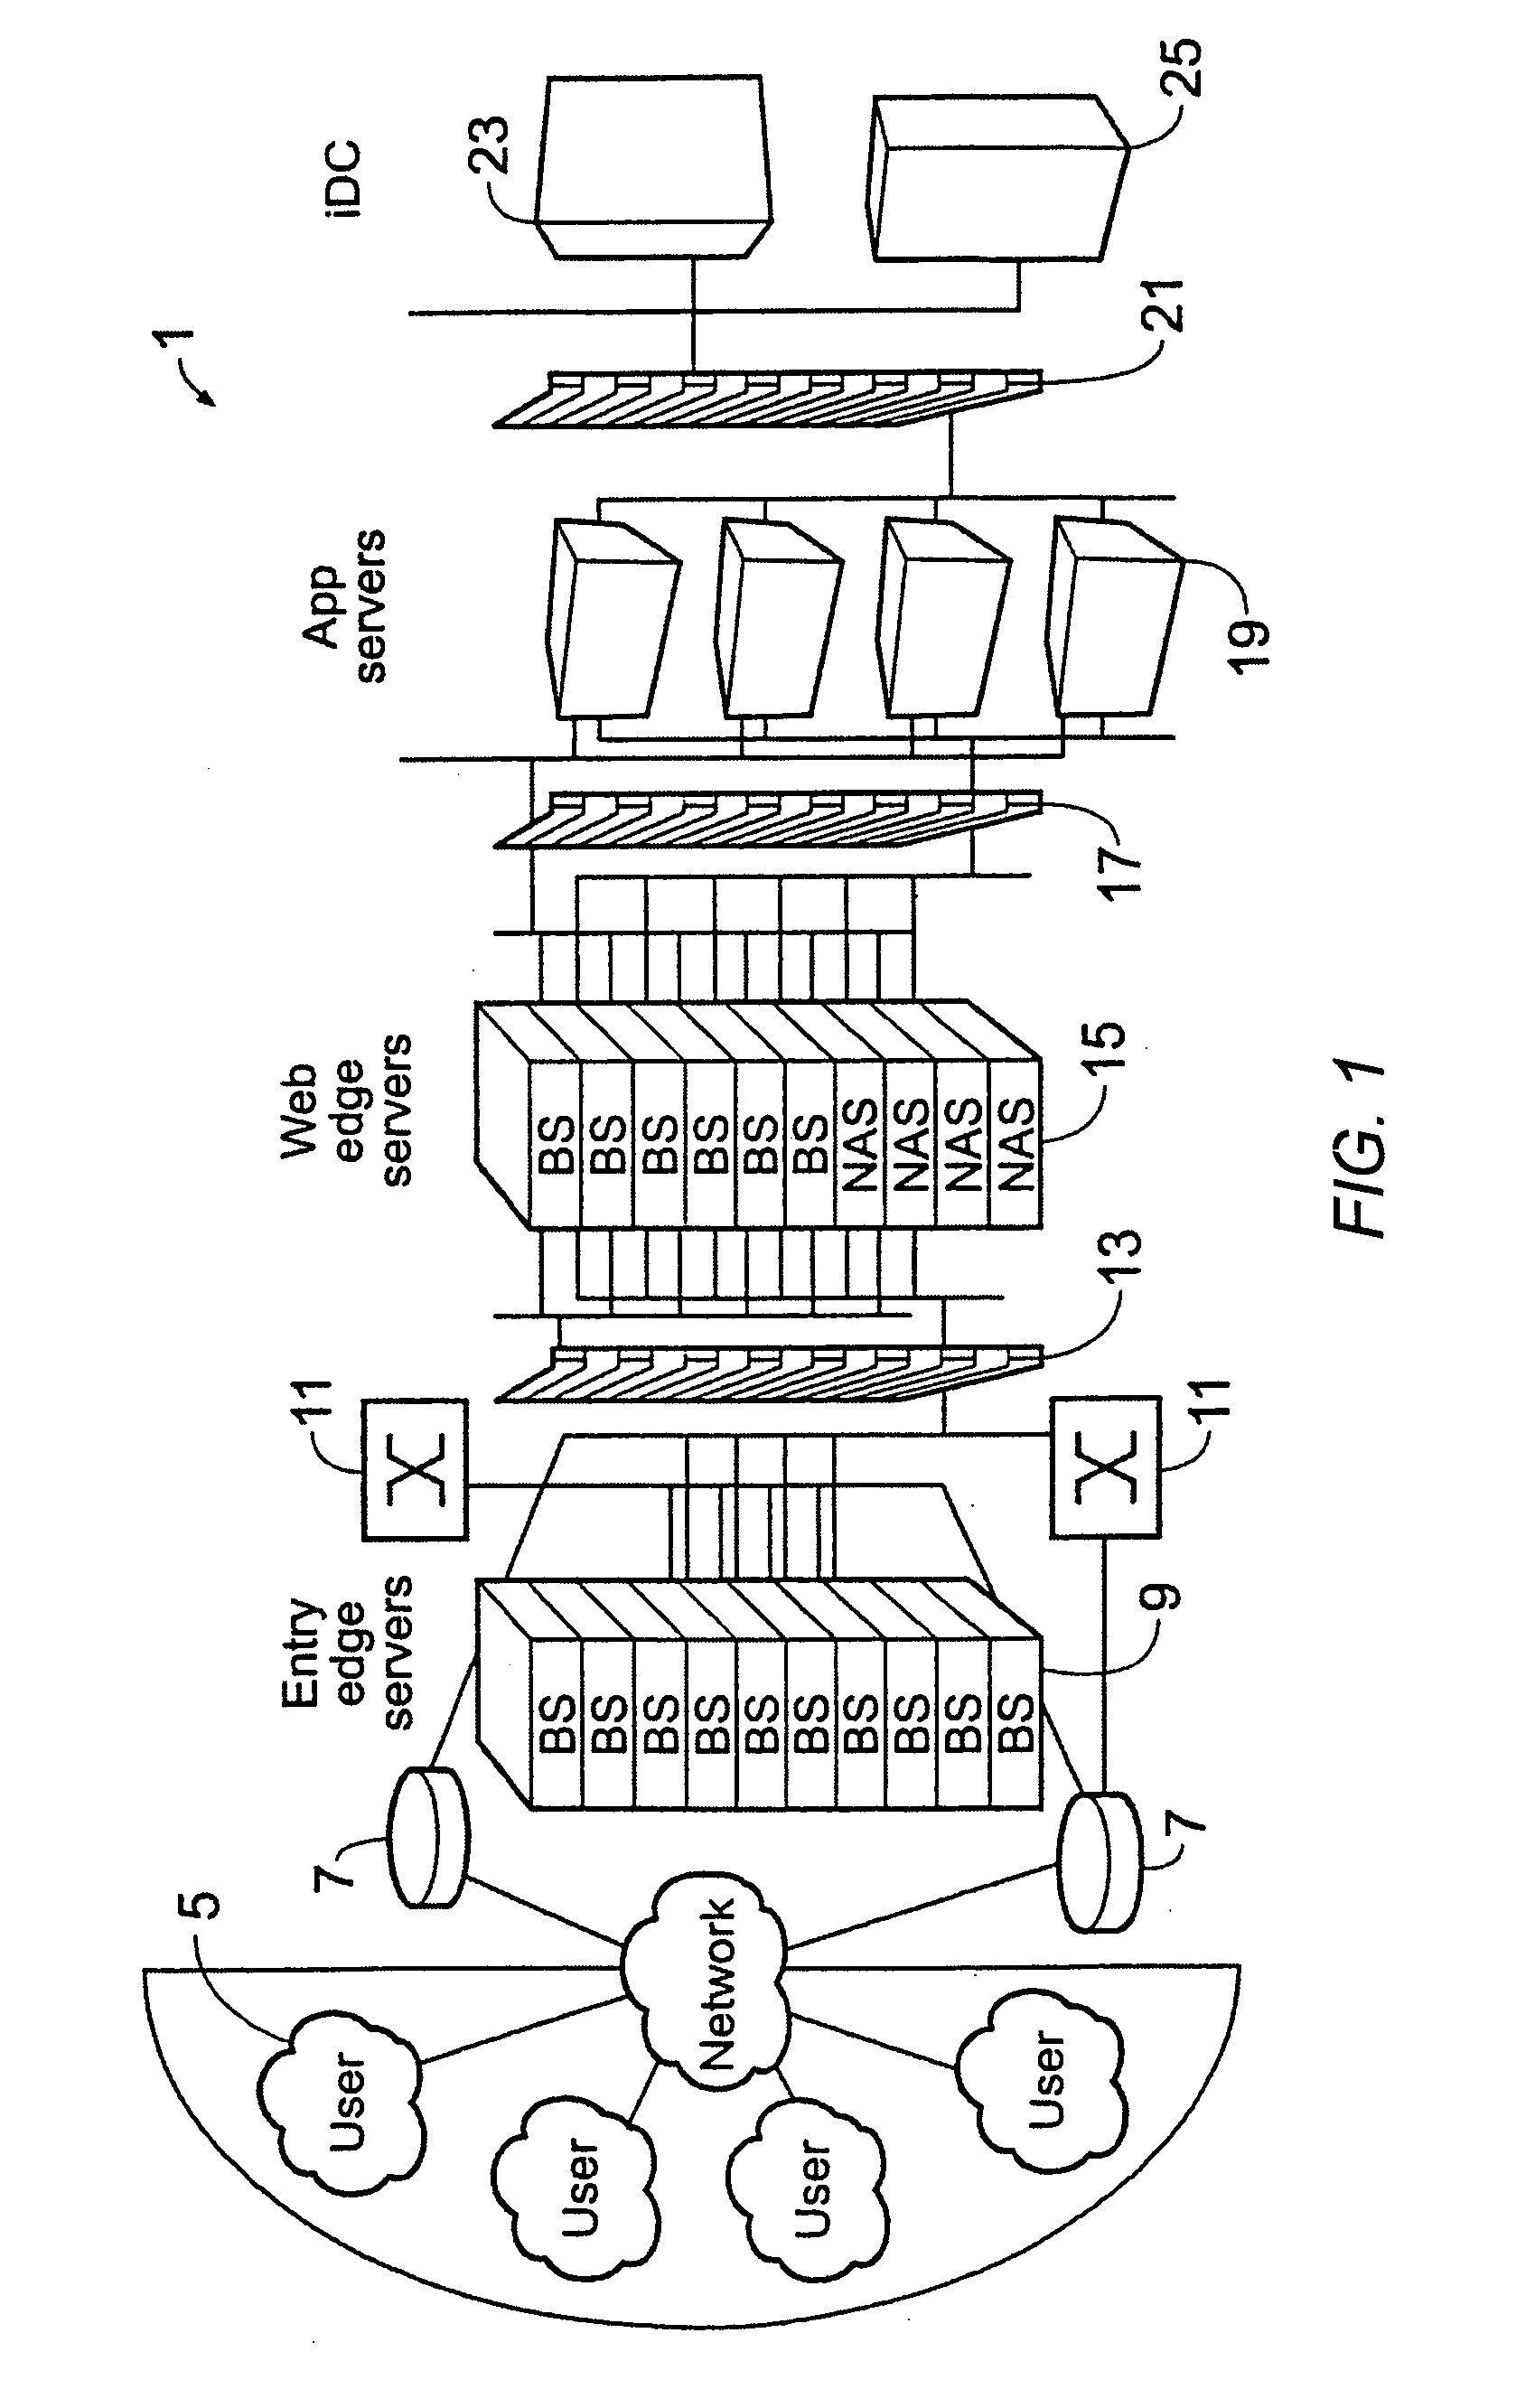 Apparatus and method for associating classes